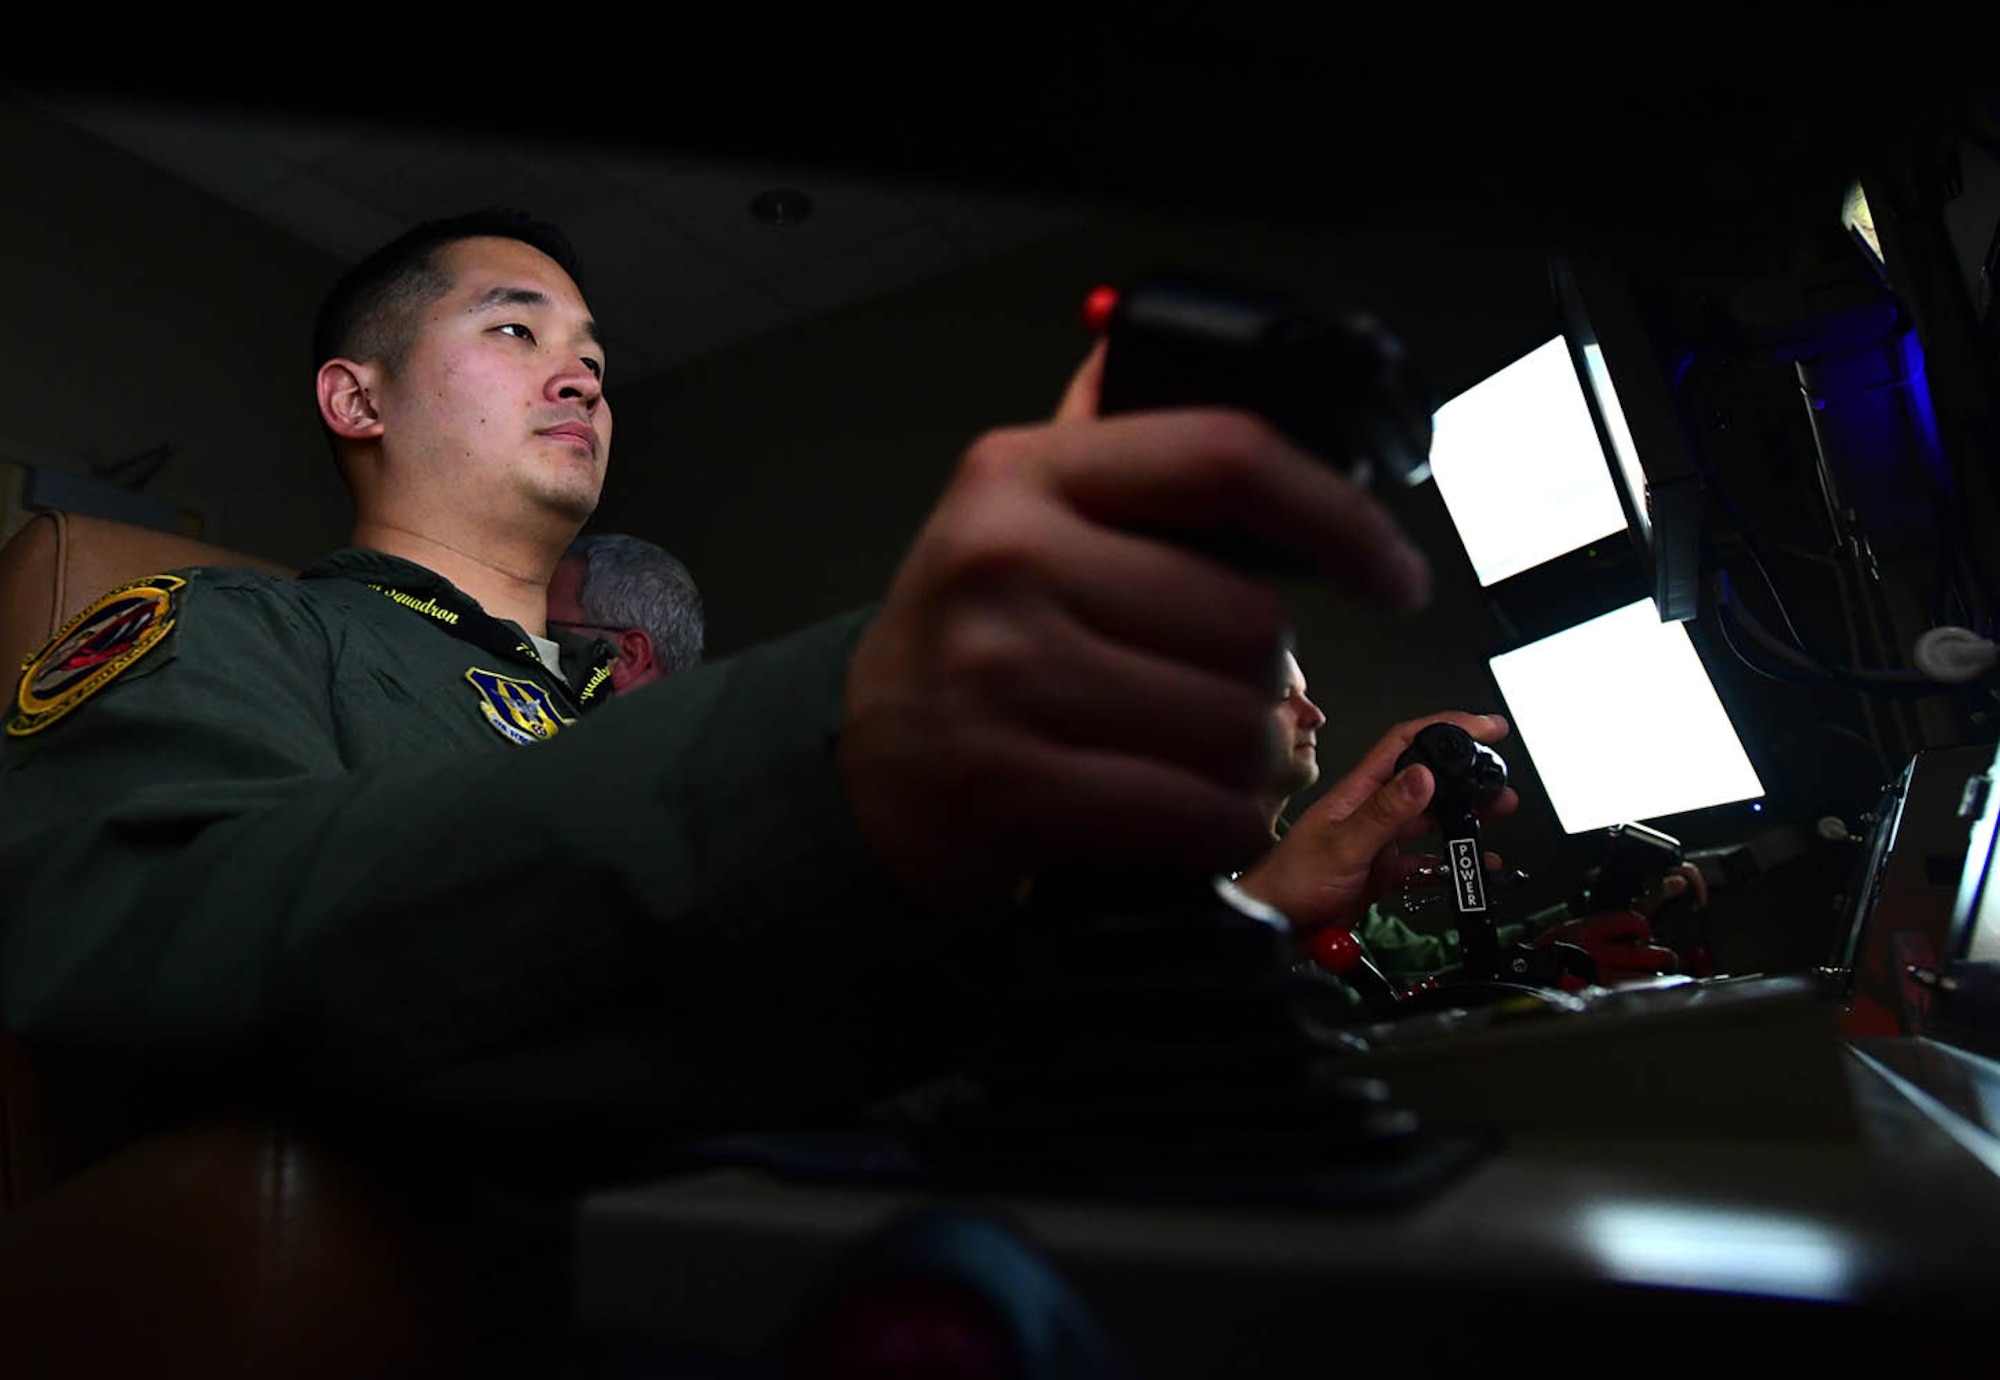 Master Sgt. Johann, 926th Wing, tracks a simulated
enemy during a training mission July 7, 2017. As a sensor operator, Johann operates the multi-spectral targeting system of an MQ-9 for reconnaissance and providing terminal guidance for weapons. Johann was selected as one of the Air Force's 12 Outstanding Airmen of the Year. (U.S. Air Force photo/Senior Airman Christian Clausen)
